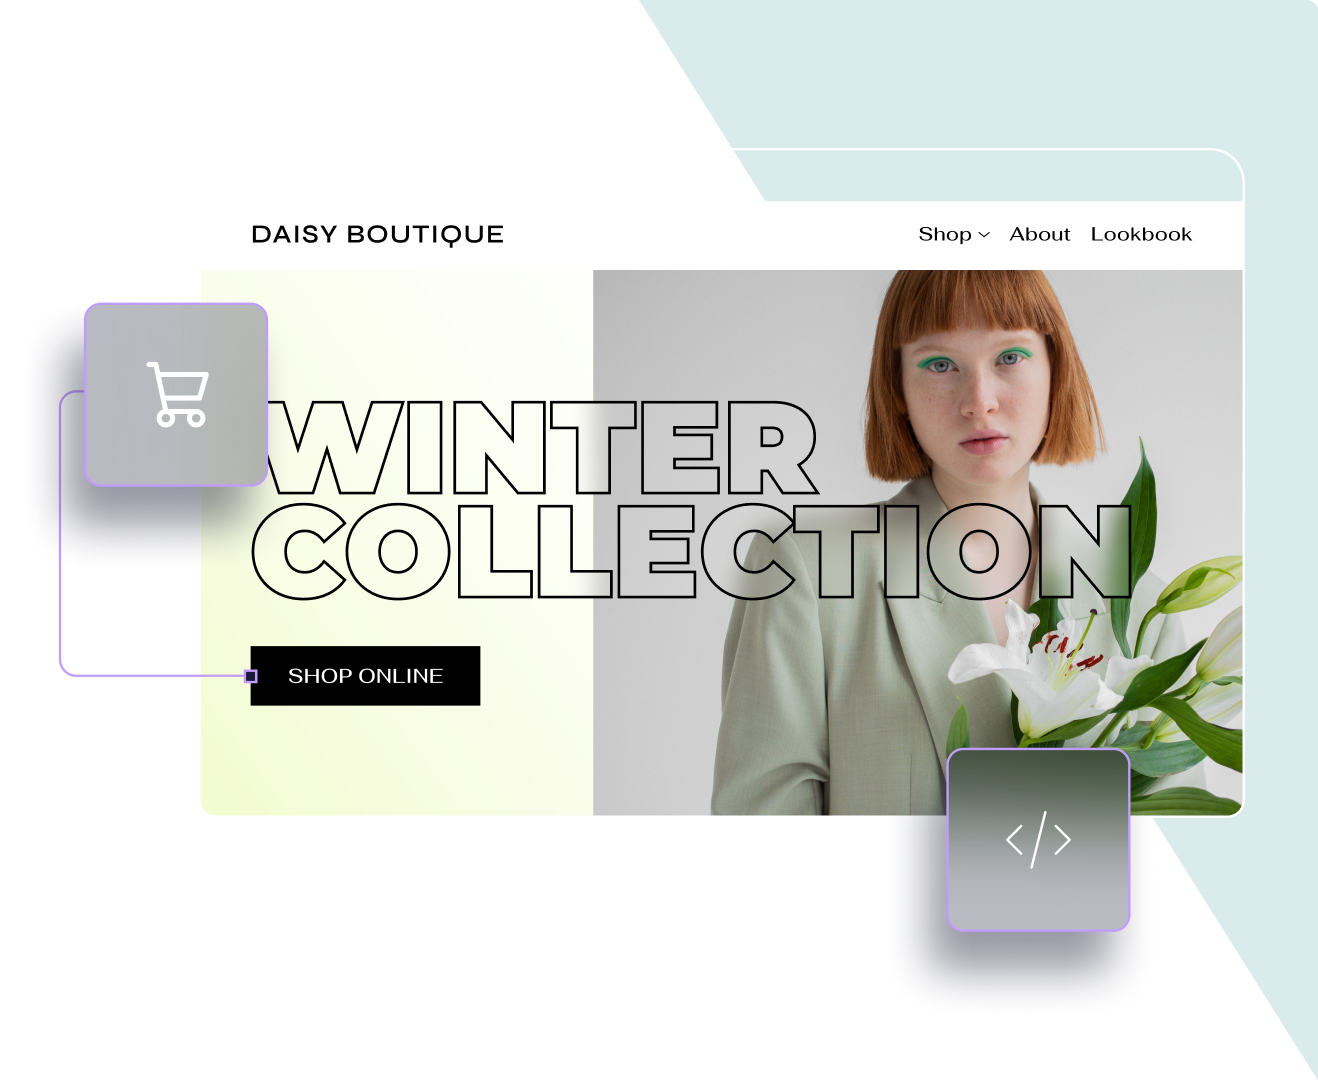 A screenshot of a website for a winter collection with a woman holding a flower.